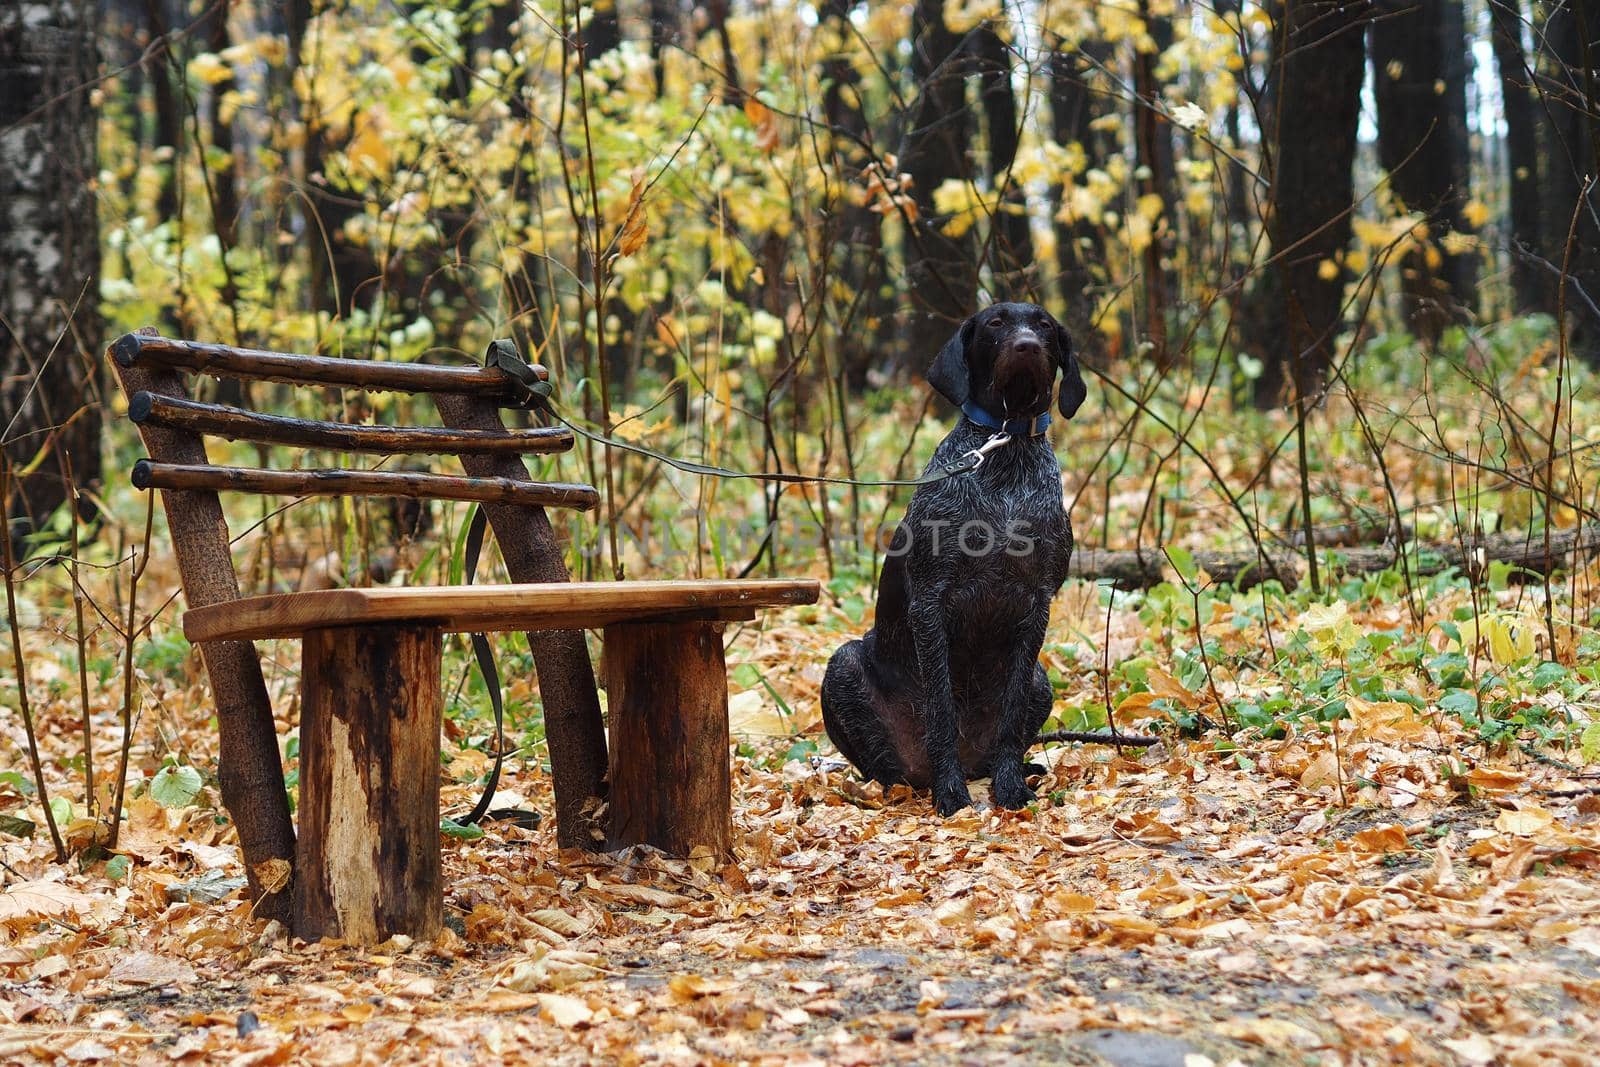 A pedigree dog waits for its owner tied to a bench in the autumn forest.